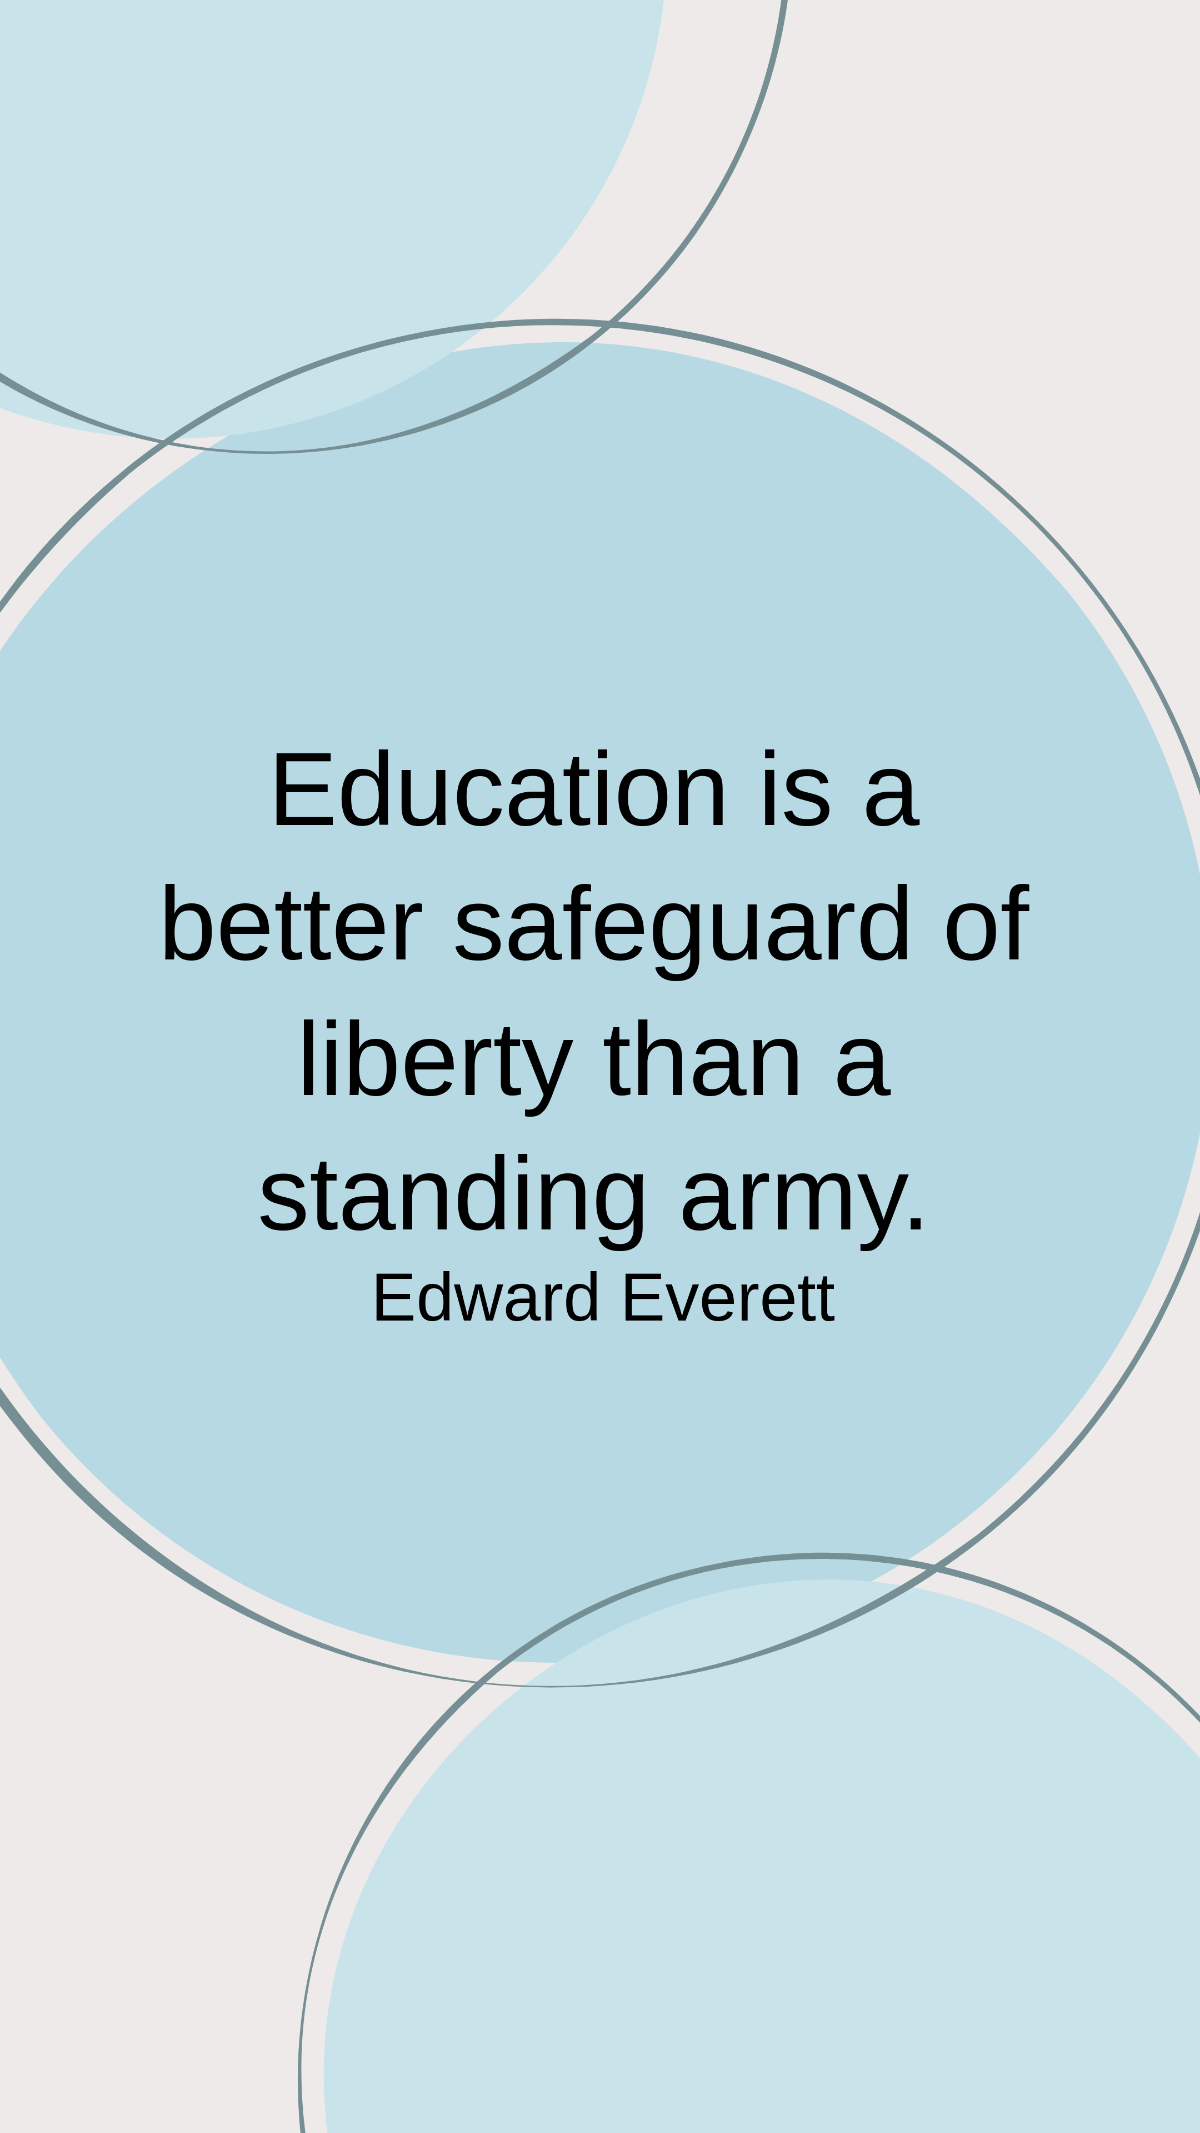 Free Edward Everett - Education is a better safeguard of liberty than a standing army. Template